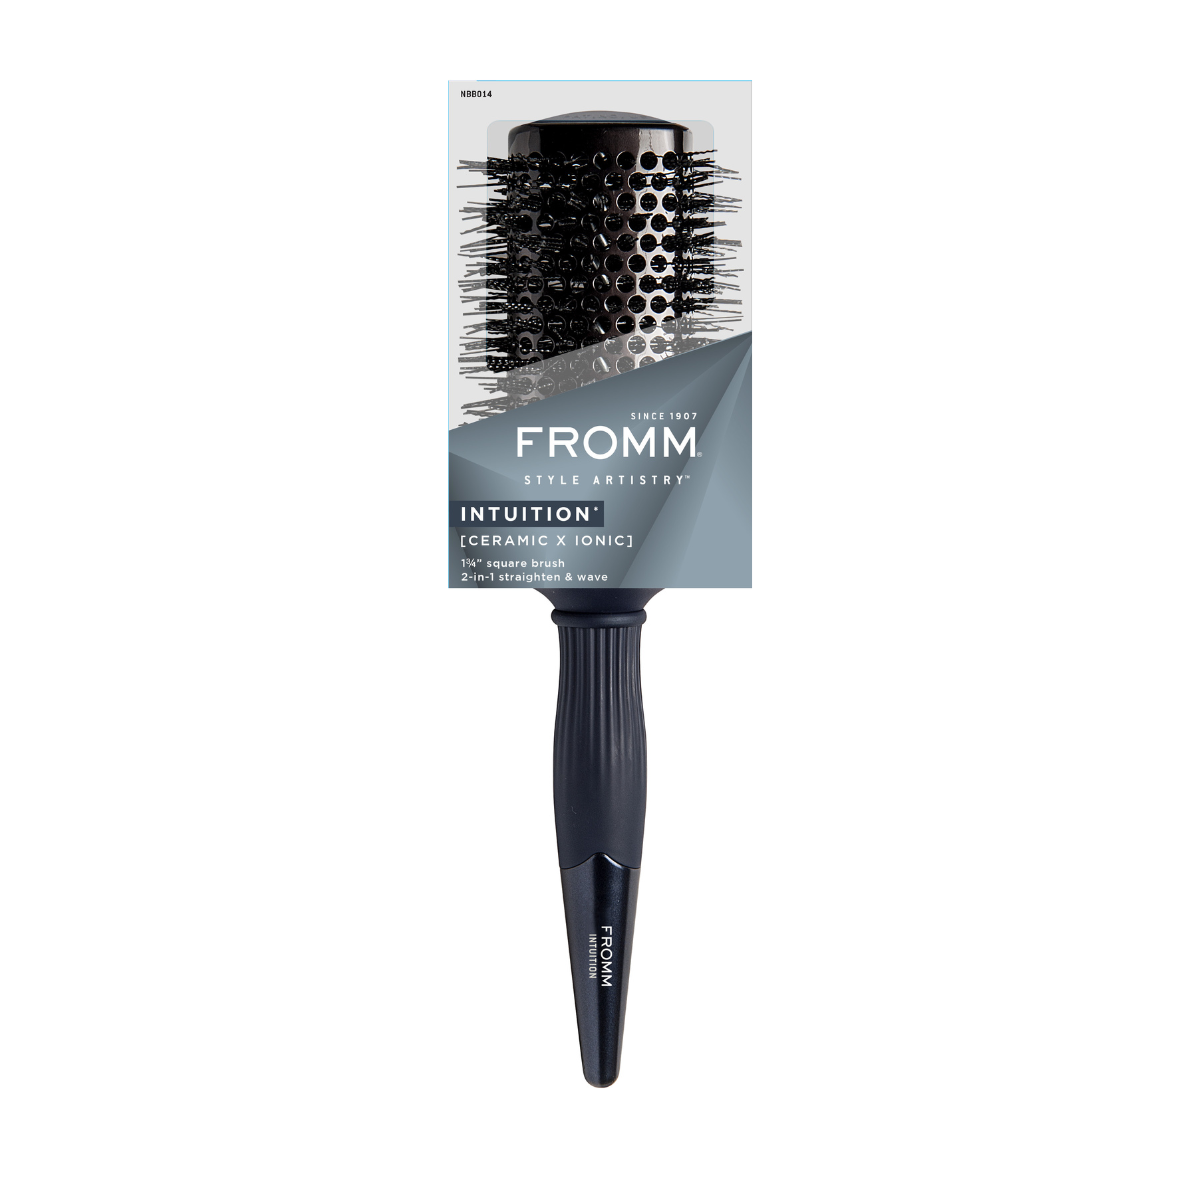 FROMM Intuition Square Thermal Brush 1¾”